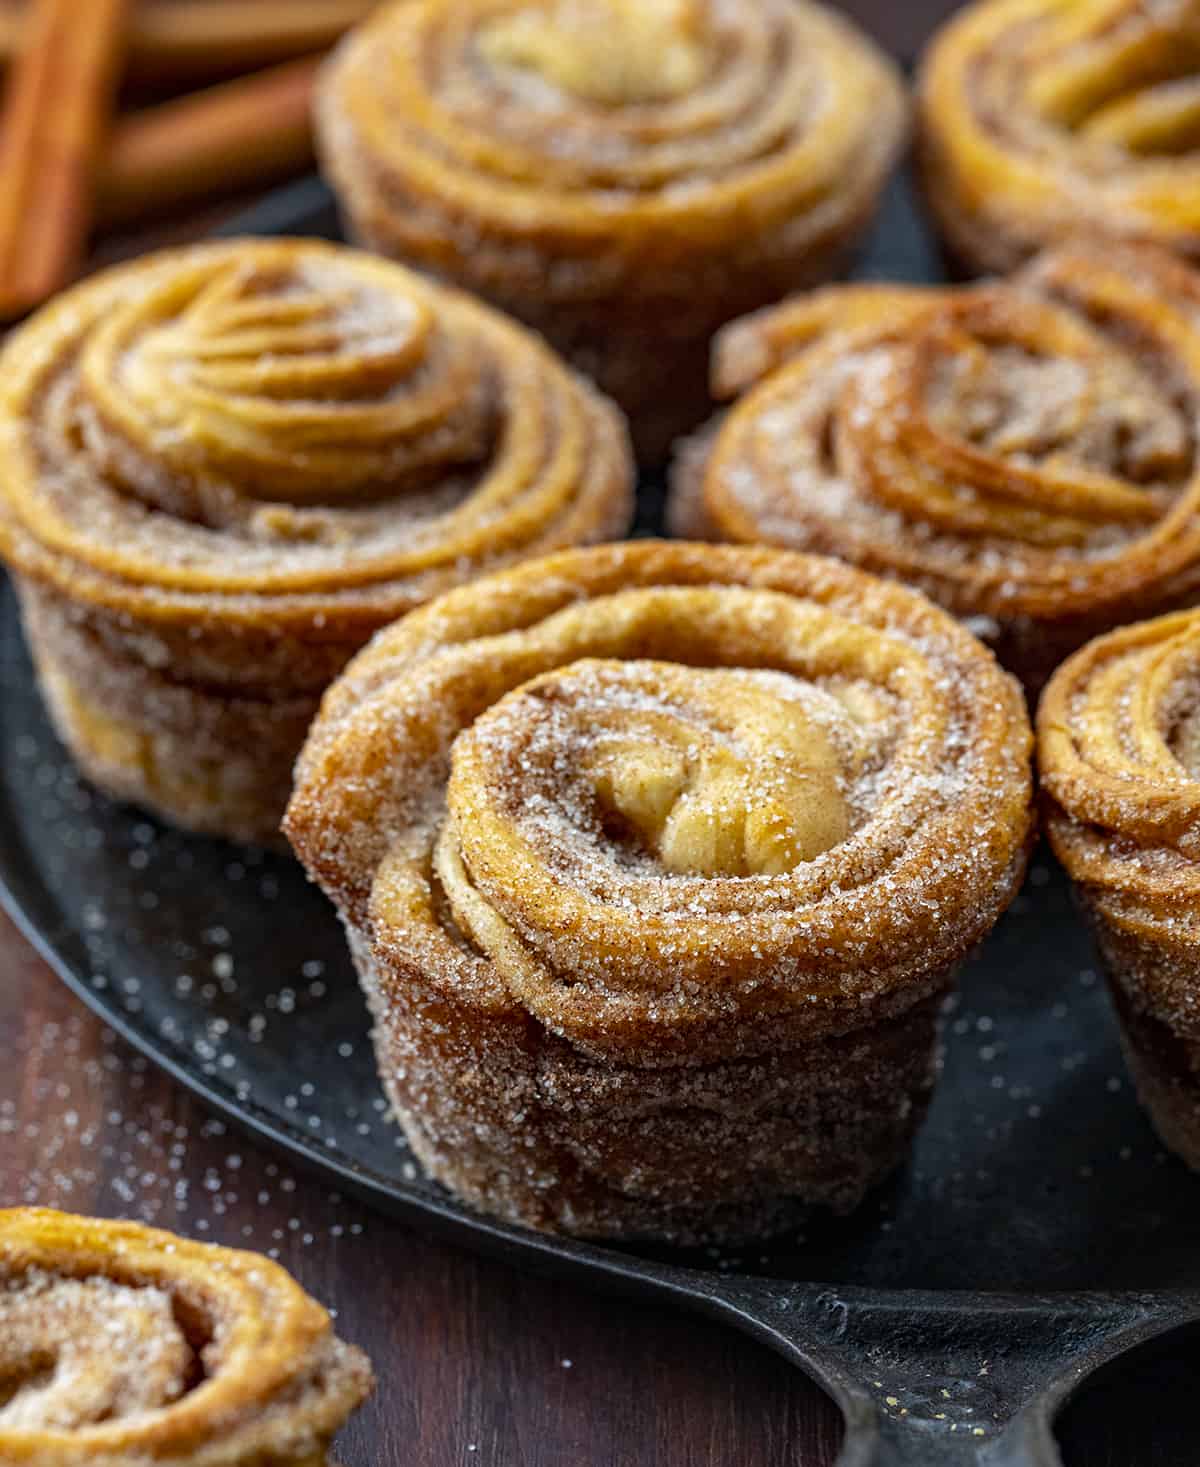 Close up of Cruffins on a Black Plate. Baking, Breakfast, Cruffins, Croissant Muffins, Easy Cruffins, Easy Cruffin Recipe, Fall Baking, Cinnamon Cruffins, Cinnamon Sugar Cruffins, Dessert, Breakfast Ideas, Brunch Recipes, i am baker, iambaker